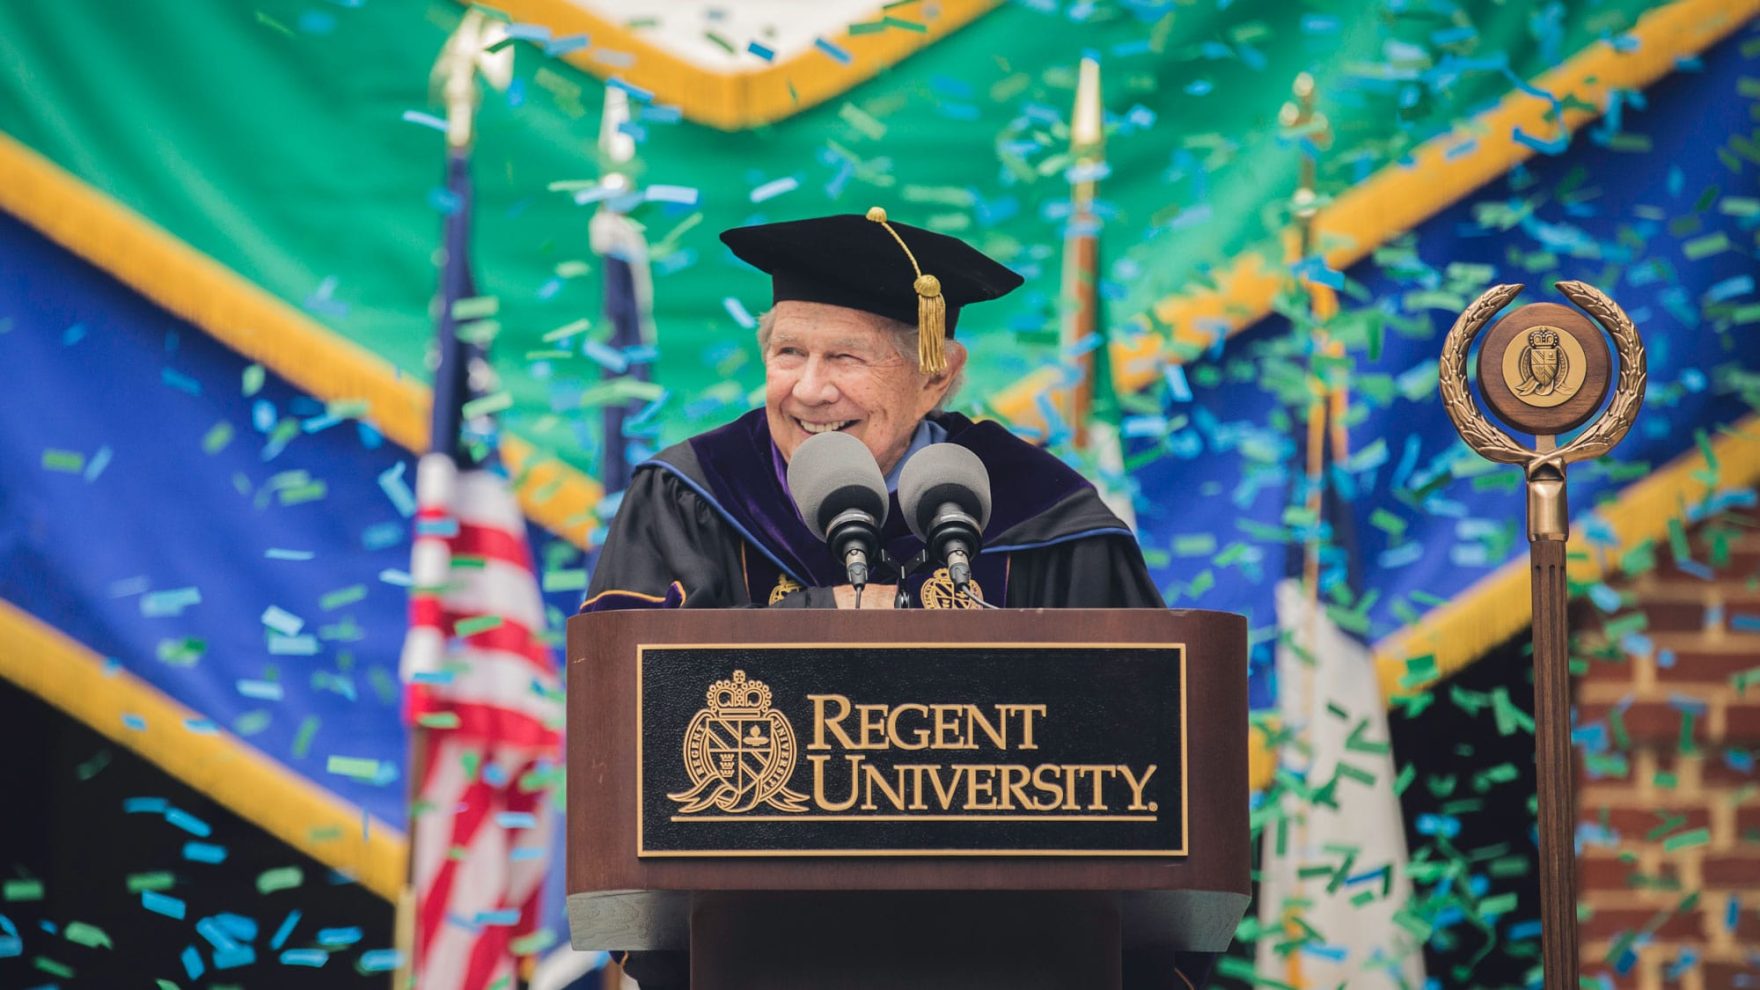 Regent University Mourns the Loss of Founder, Chancellor & CEO Dr. M.G. “Pat” Robertson